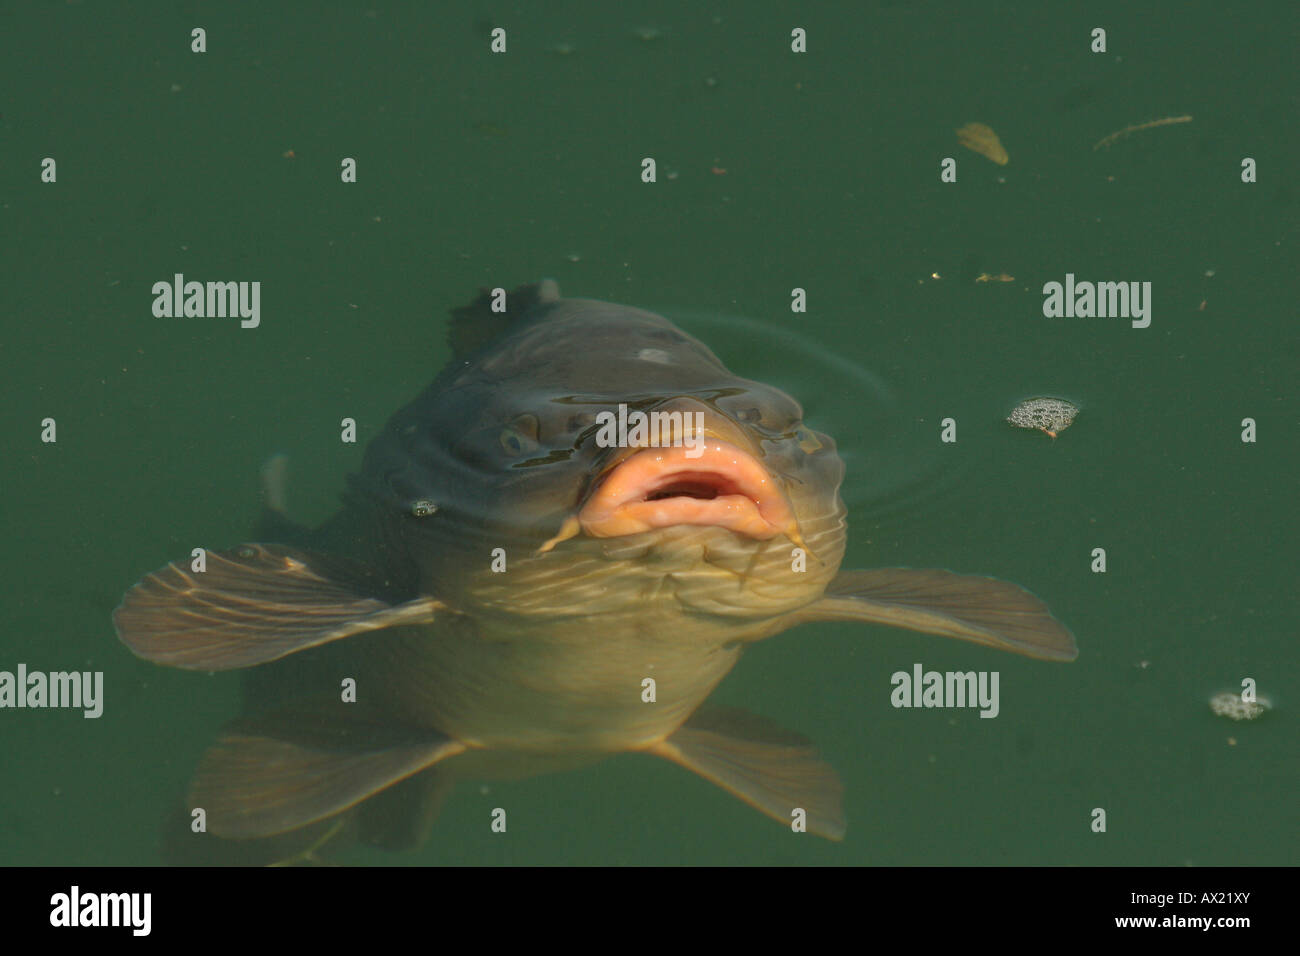 Common Carp (Cyprinus carpio) eating bread pieces at water's surface Stock Photo